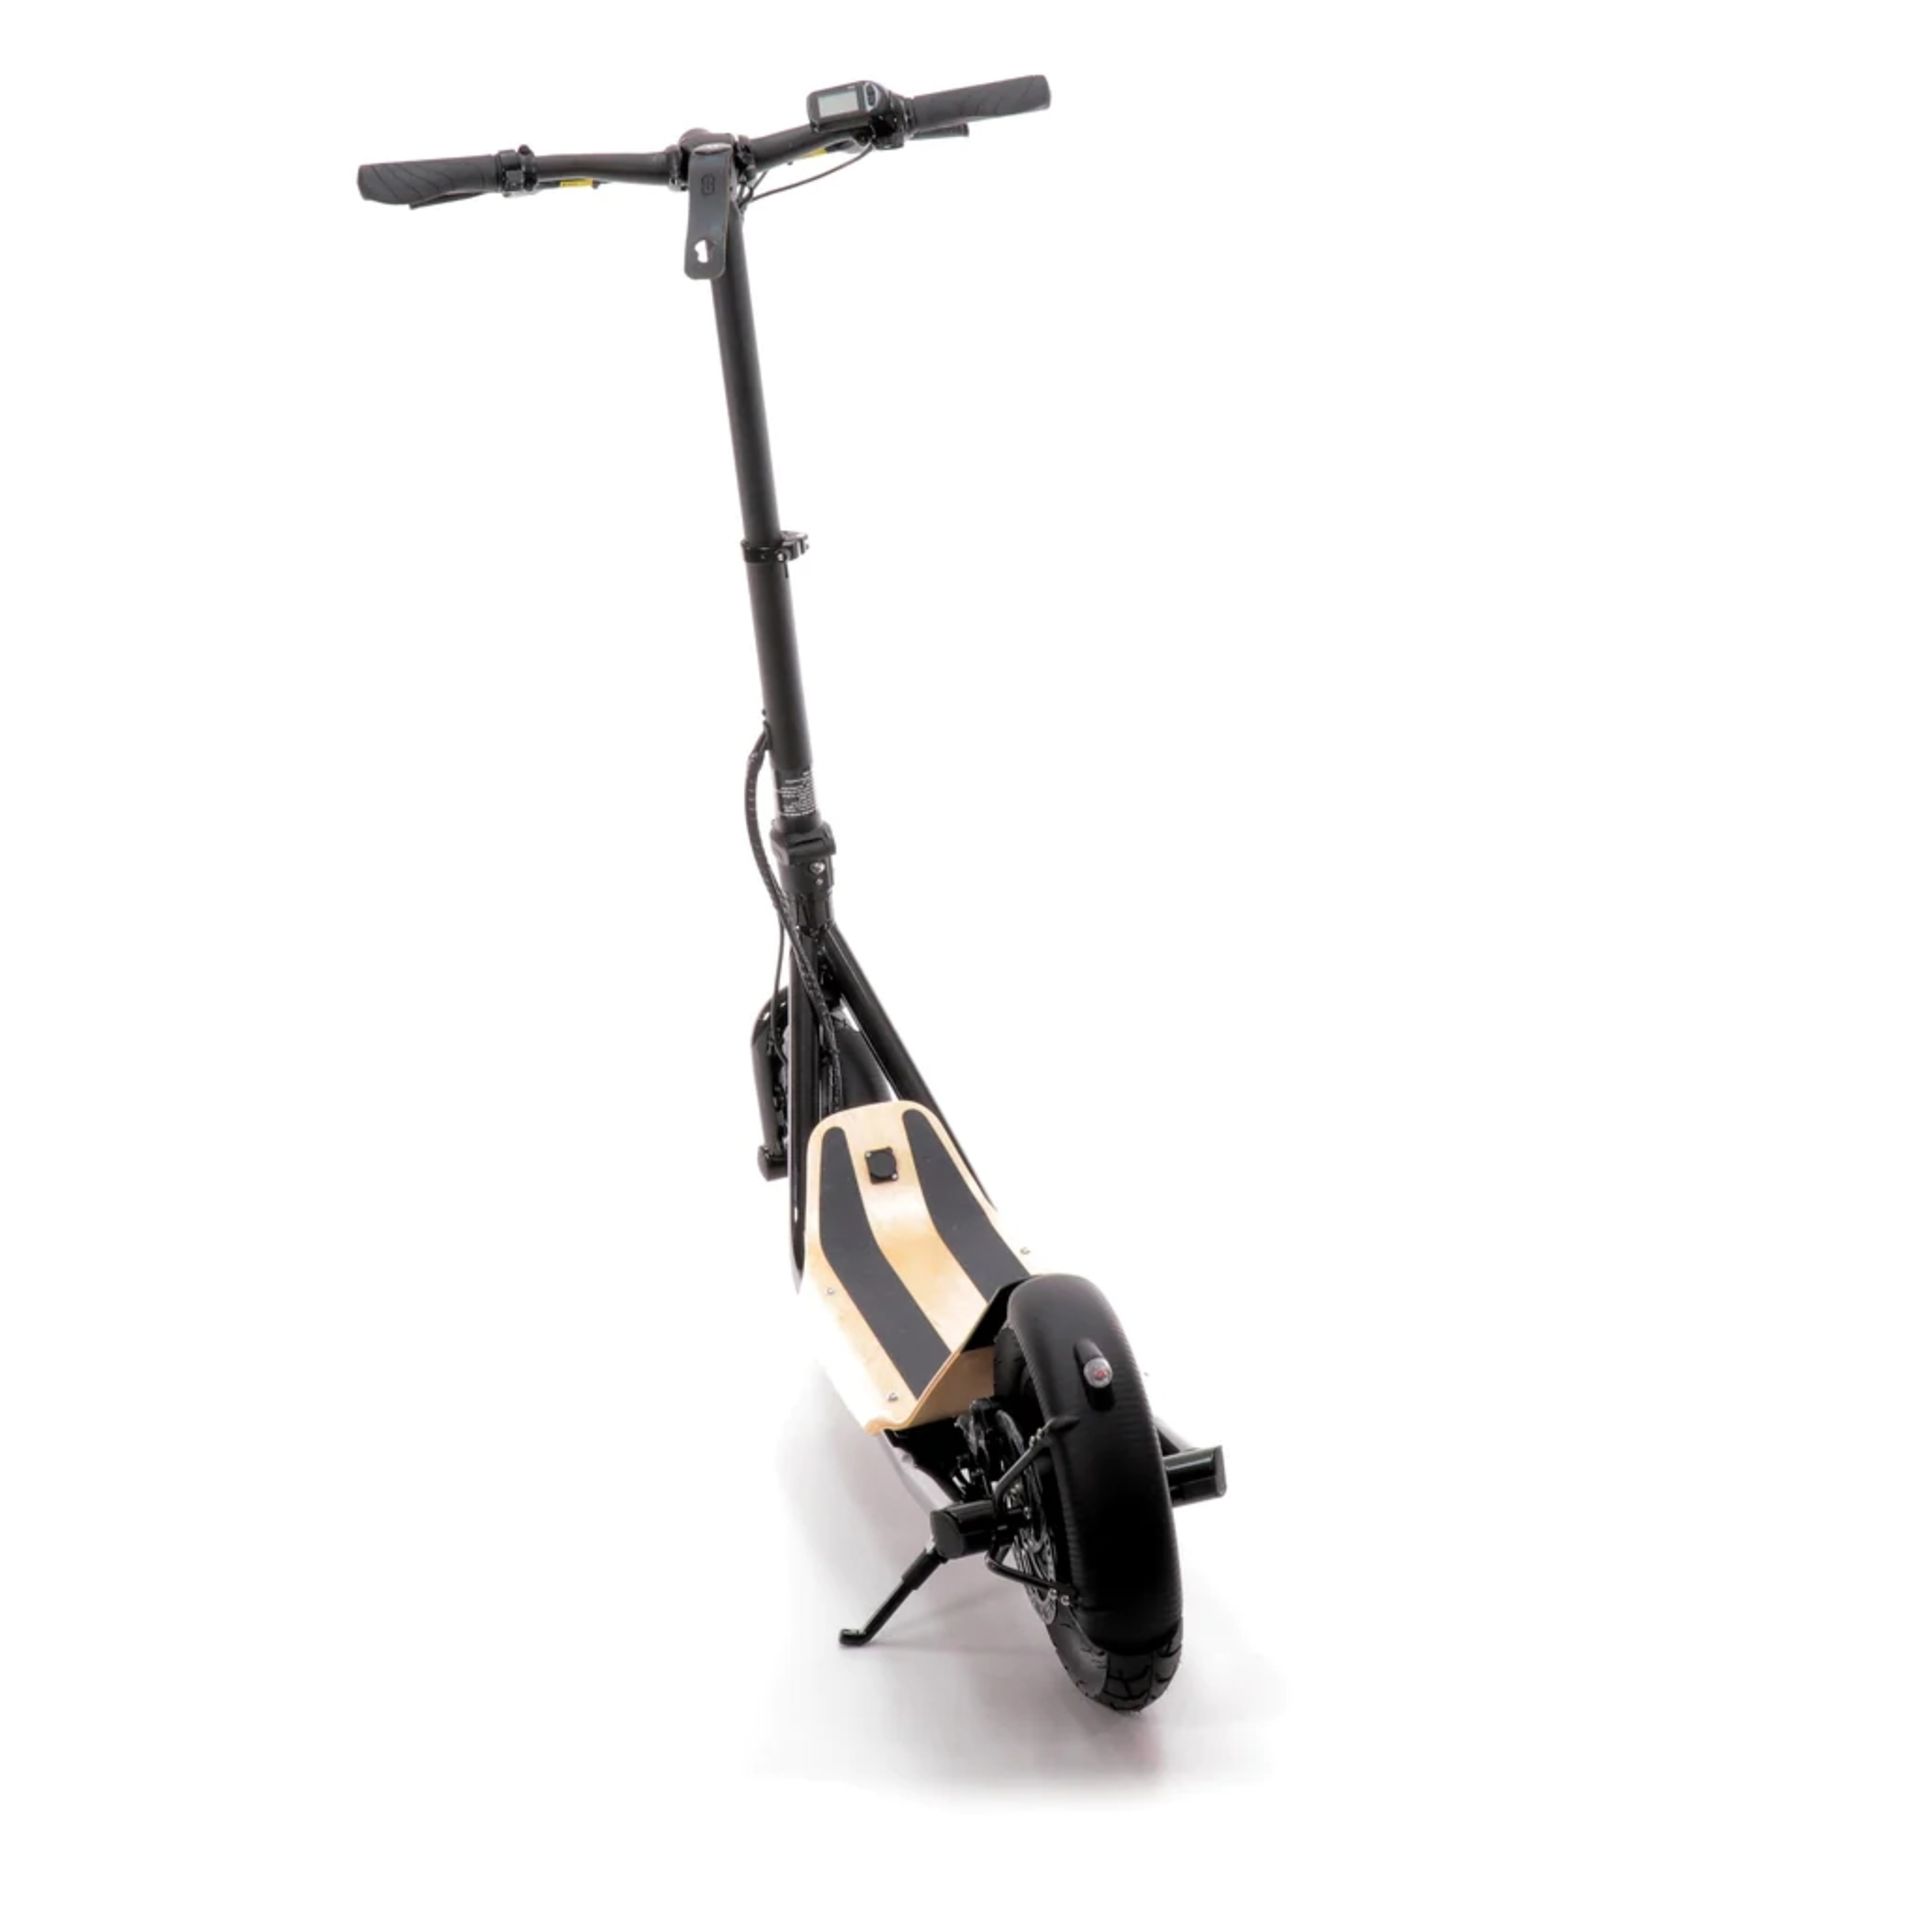 BRAND NEW 8TEV B12 PROXI ELECTRIC SCOOTER GLOSS BLACK RRP £1299, Perfect city commuter vehicle - Image 2 of 3